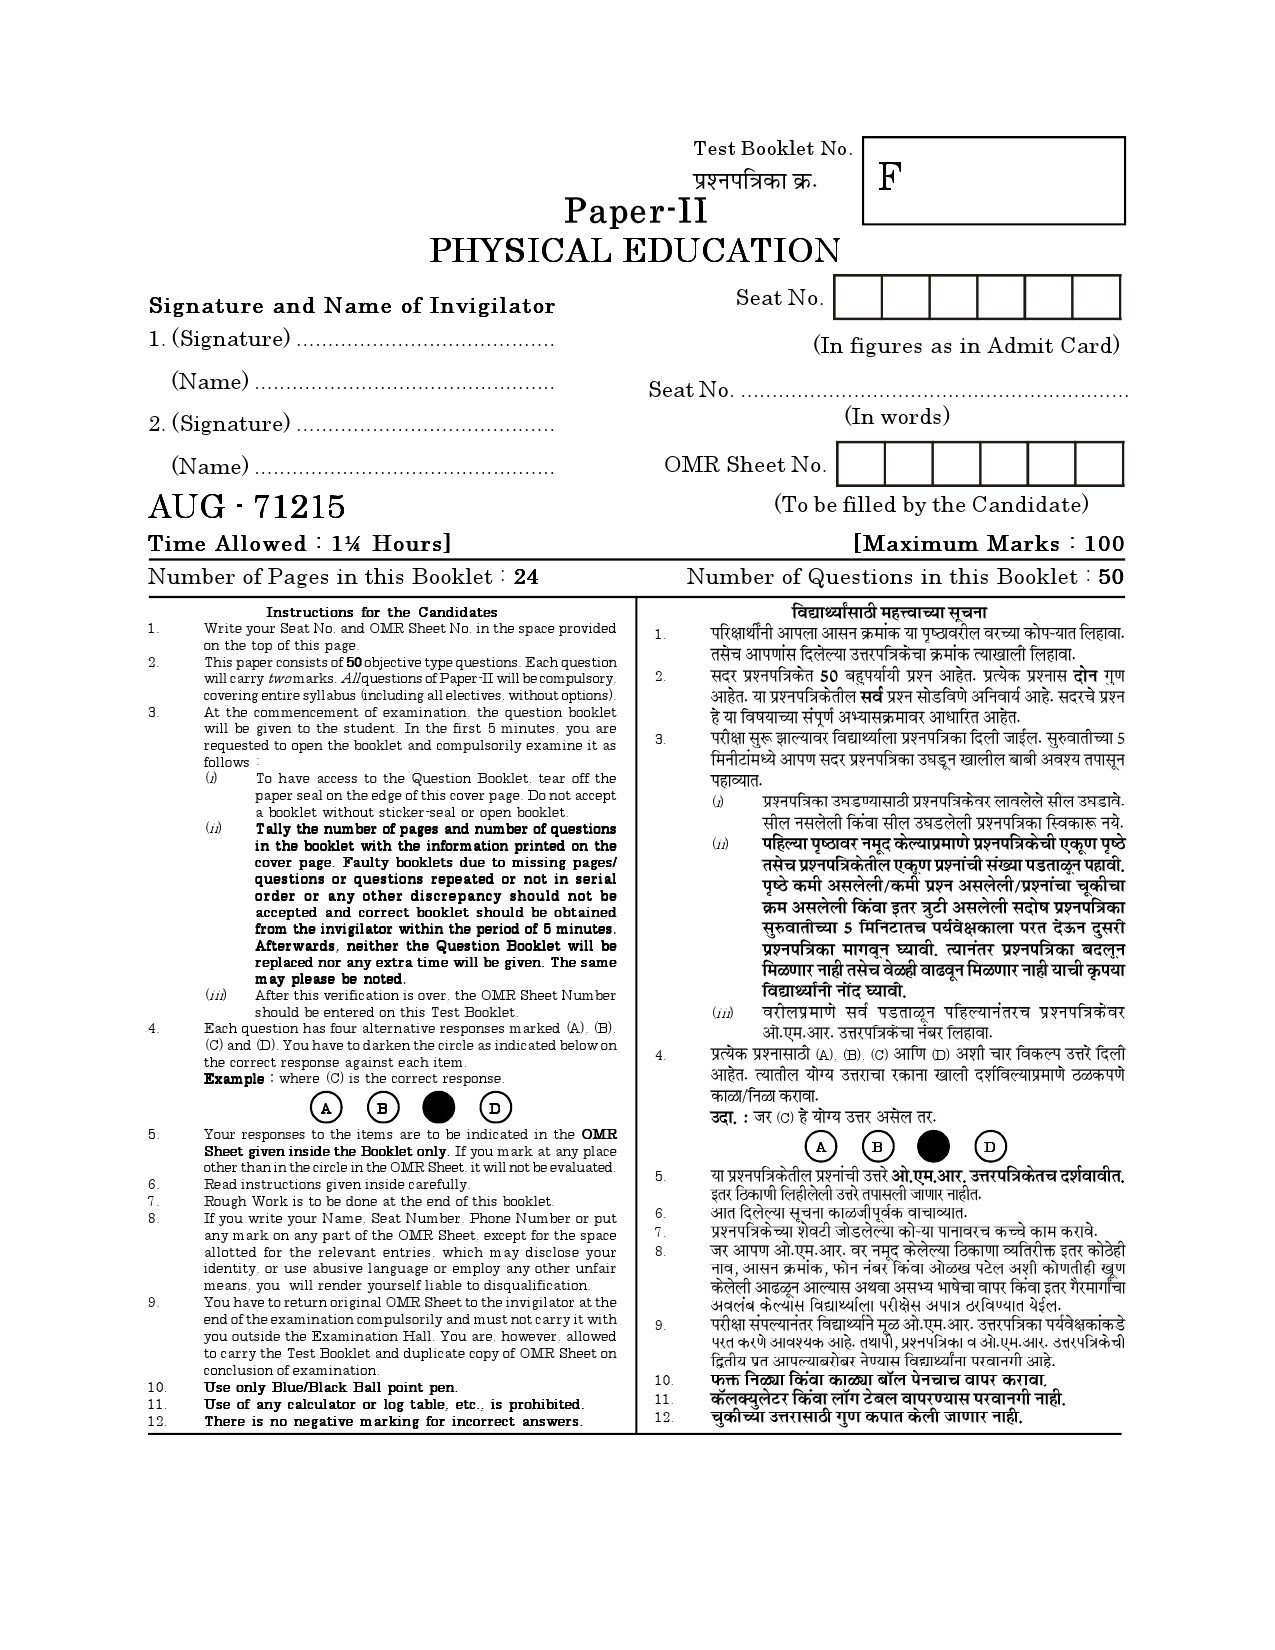 Maharashtra SET Physical Education Question Paper II August 2015 1